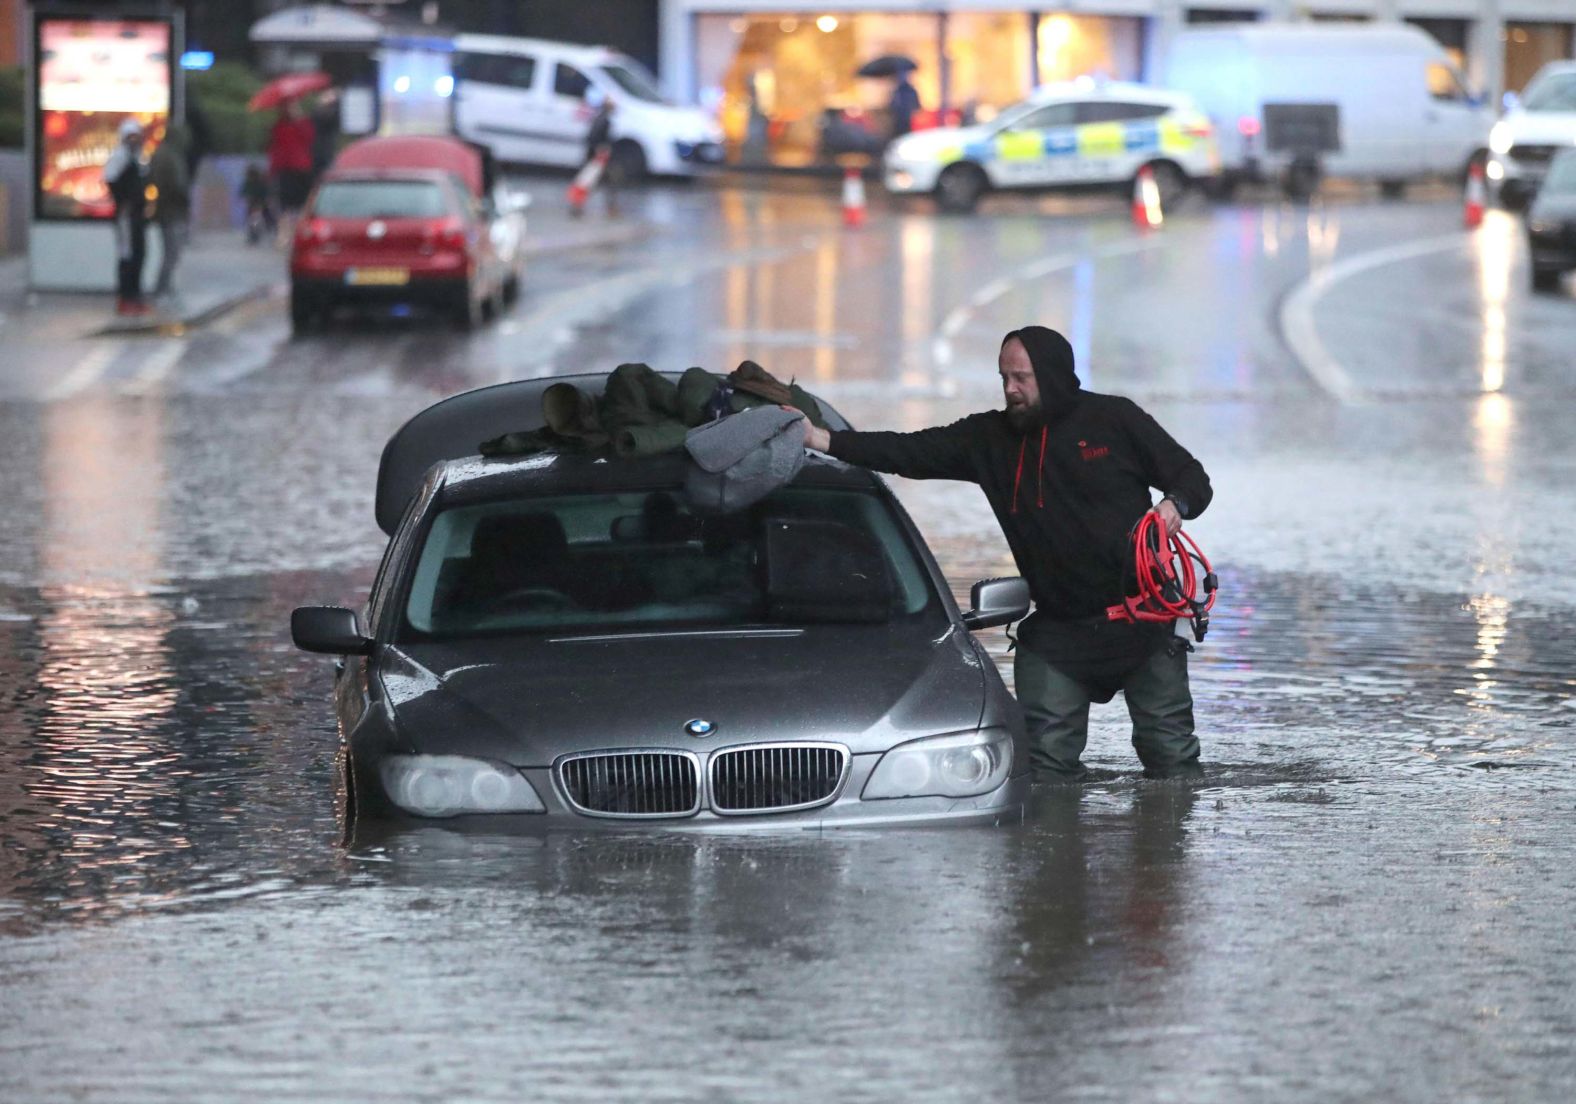 A man gathers items from a partially submerged car in Sheffield.